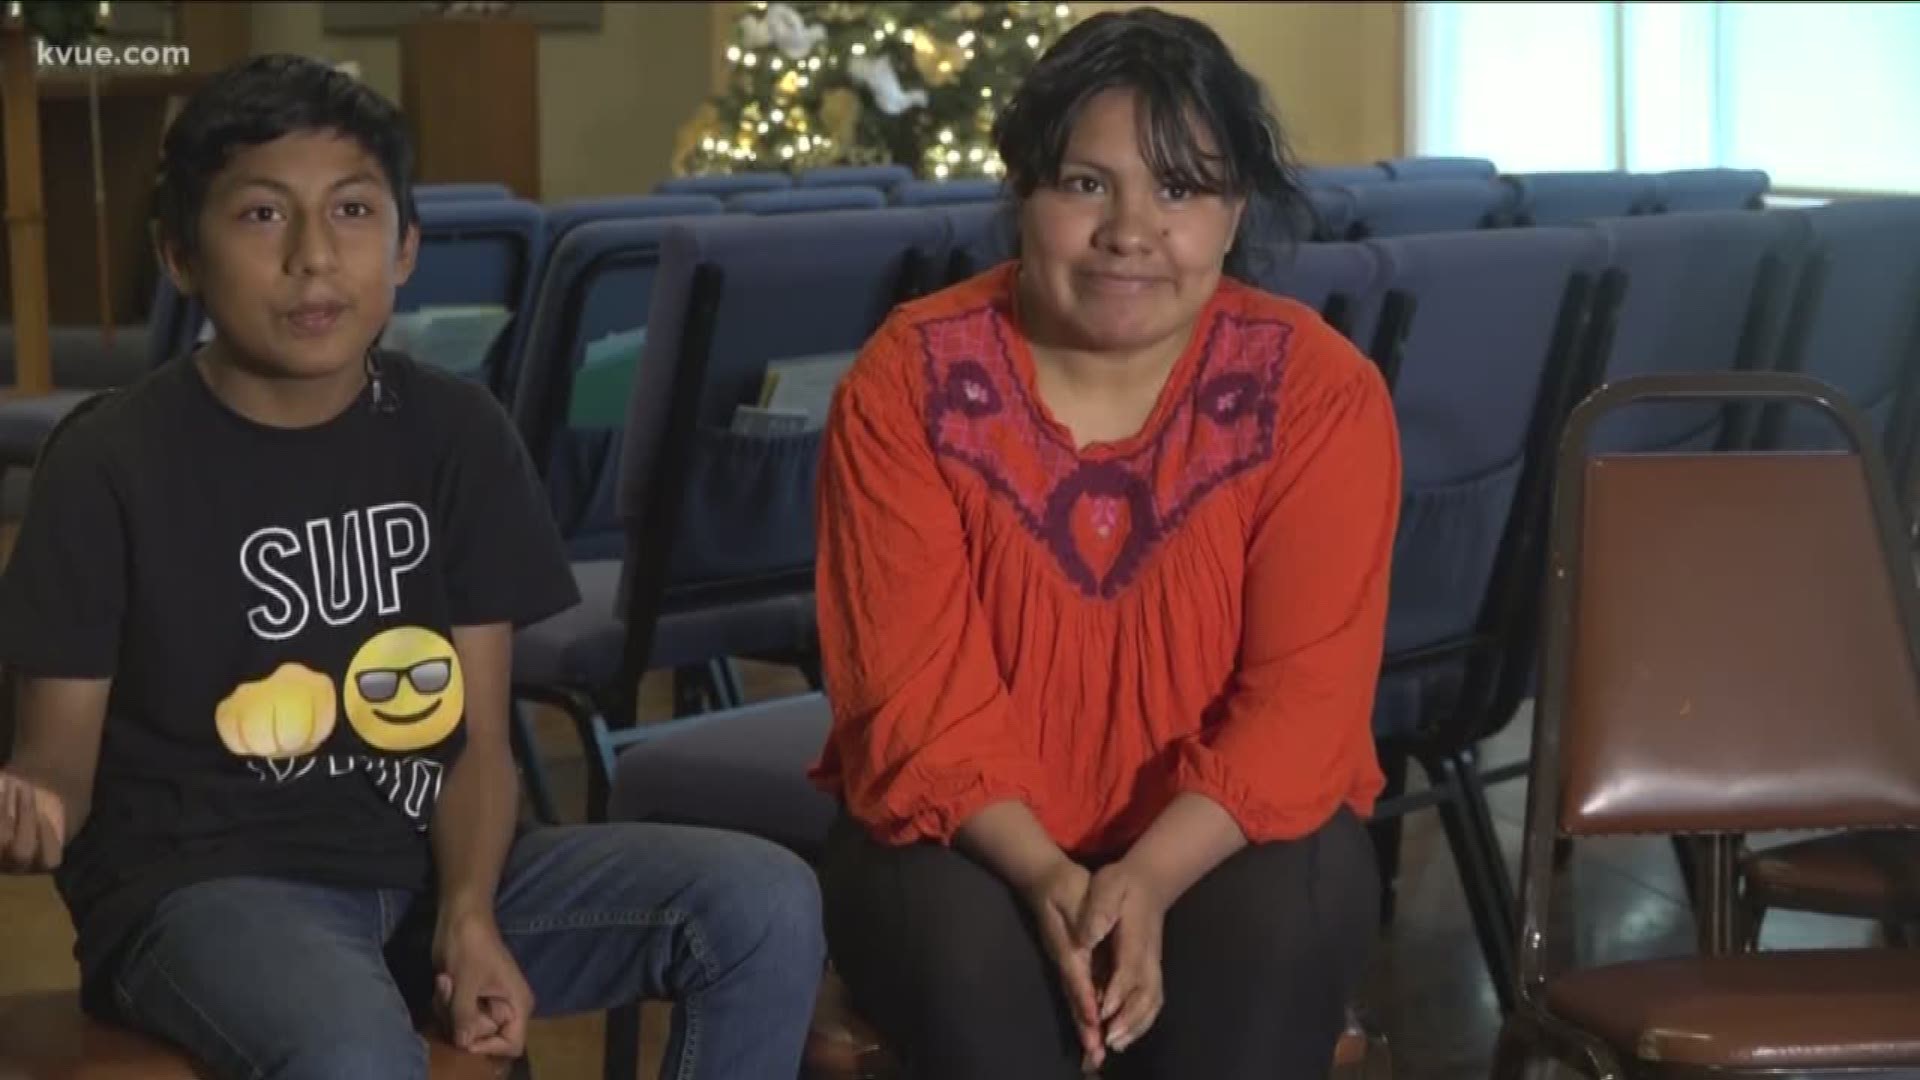 Four years ago, Ivan and Hilda Ramirez fled their native country of Guatemala to get away from violence.